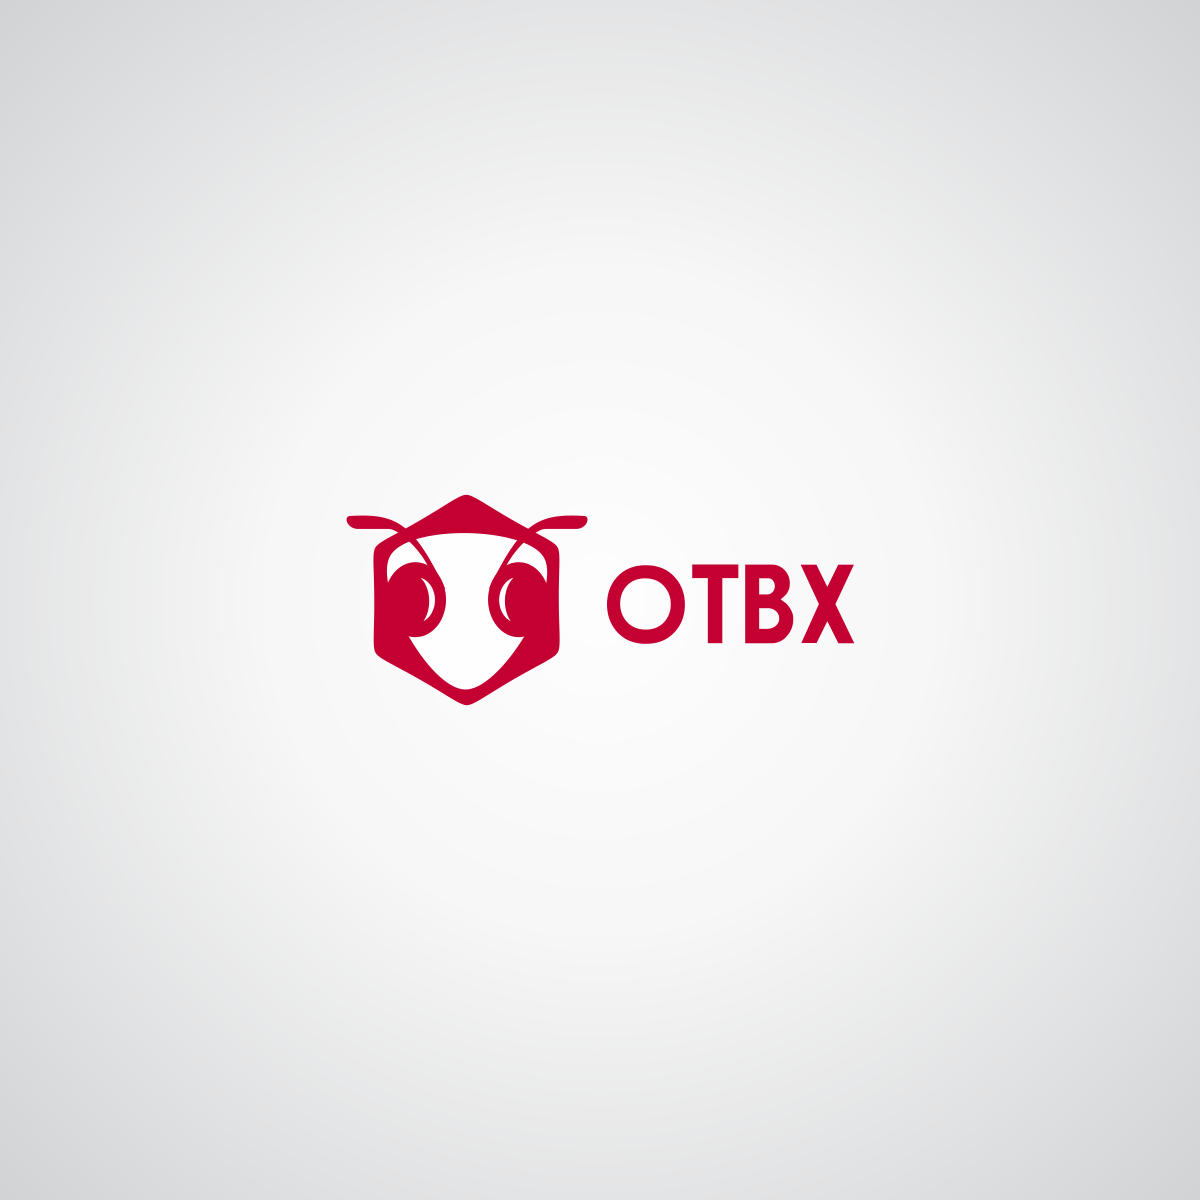 BX Red a Logo - Modern, Bold, It Company Logo Design for OTBx and Outside the bx ...